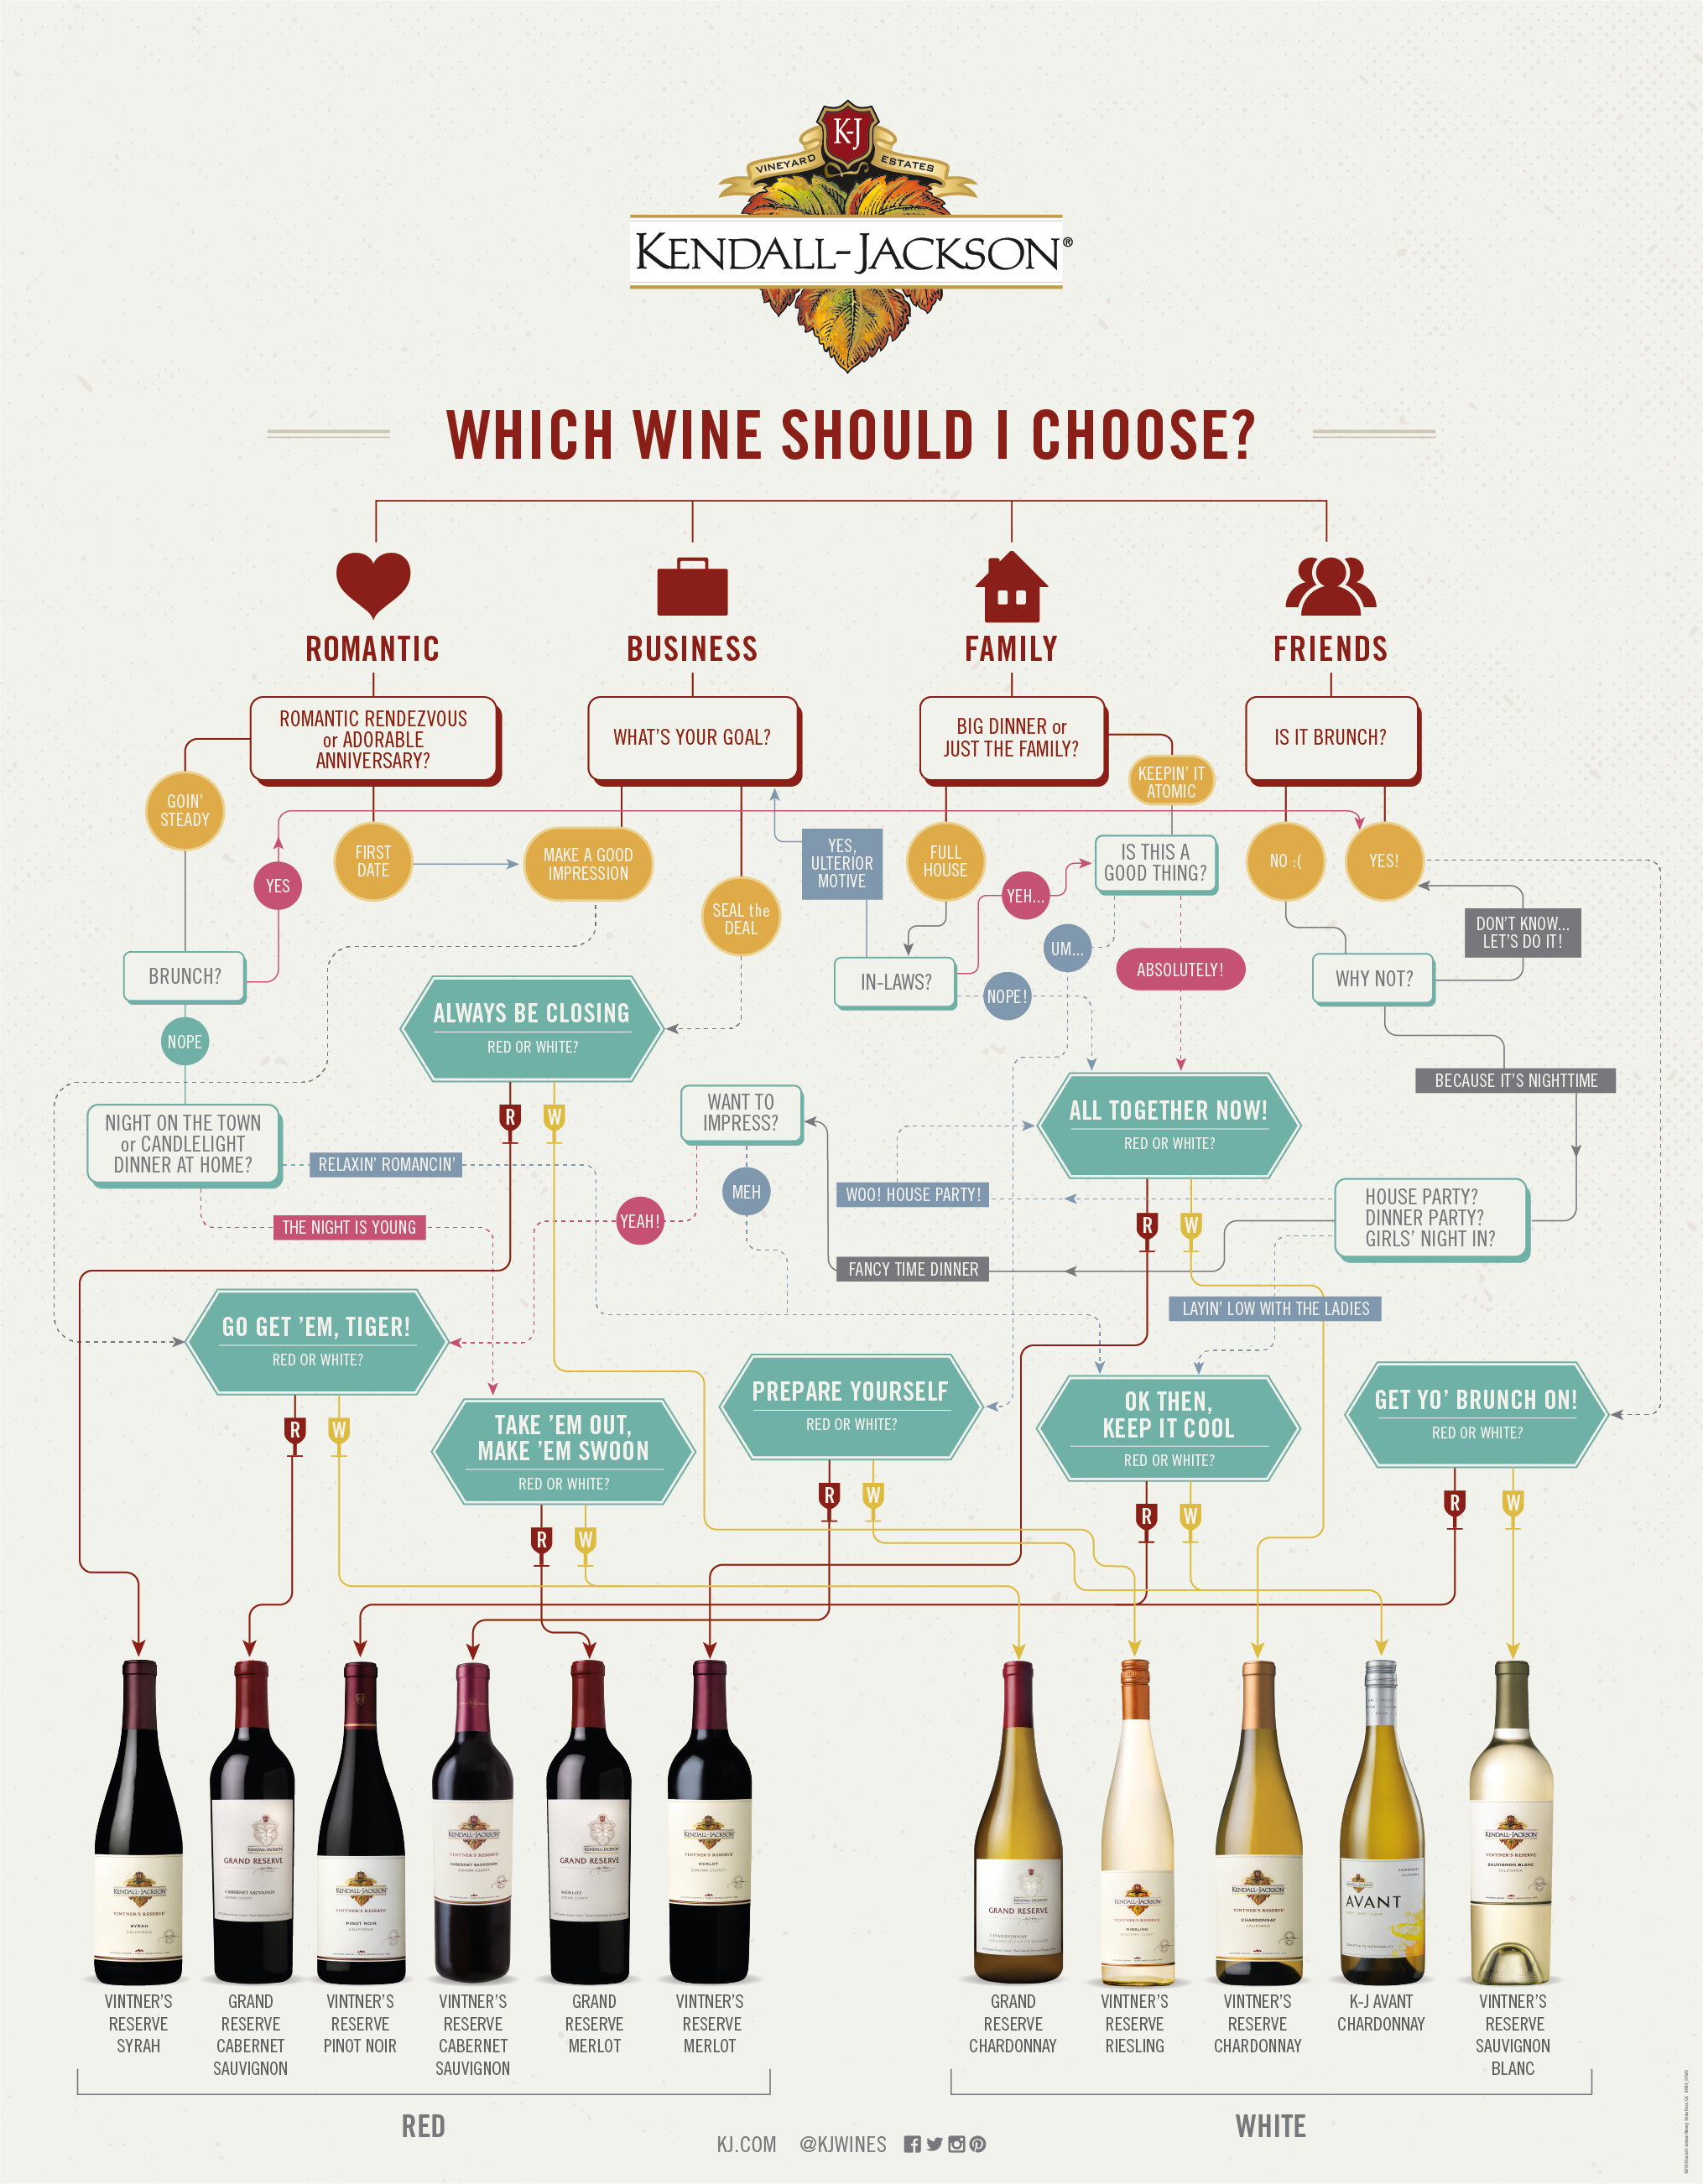 Which Wine Should I Choose?